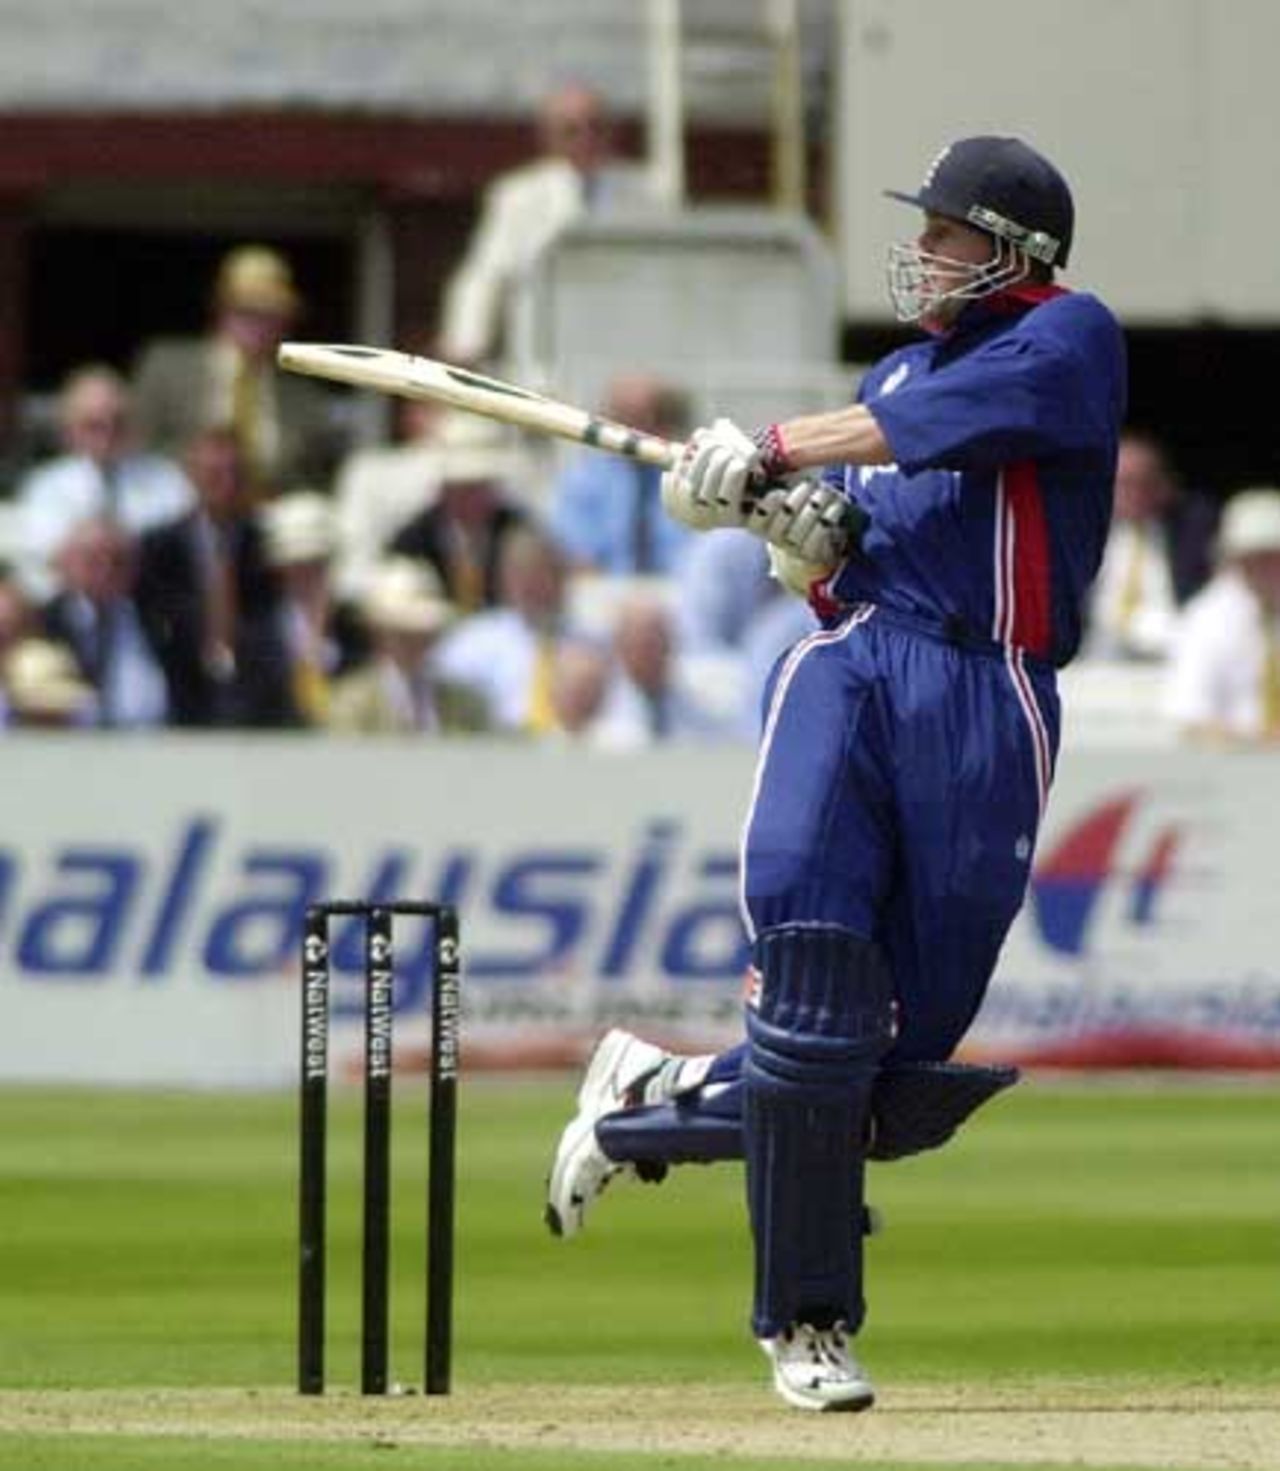 Nick Knight has pulled an Agarkar delivery to the square leg boundary, England v India at Lord's, June 2002